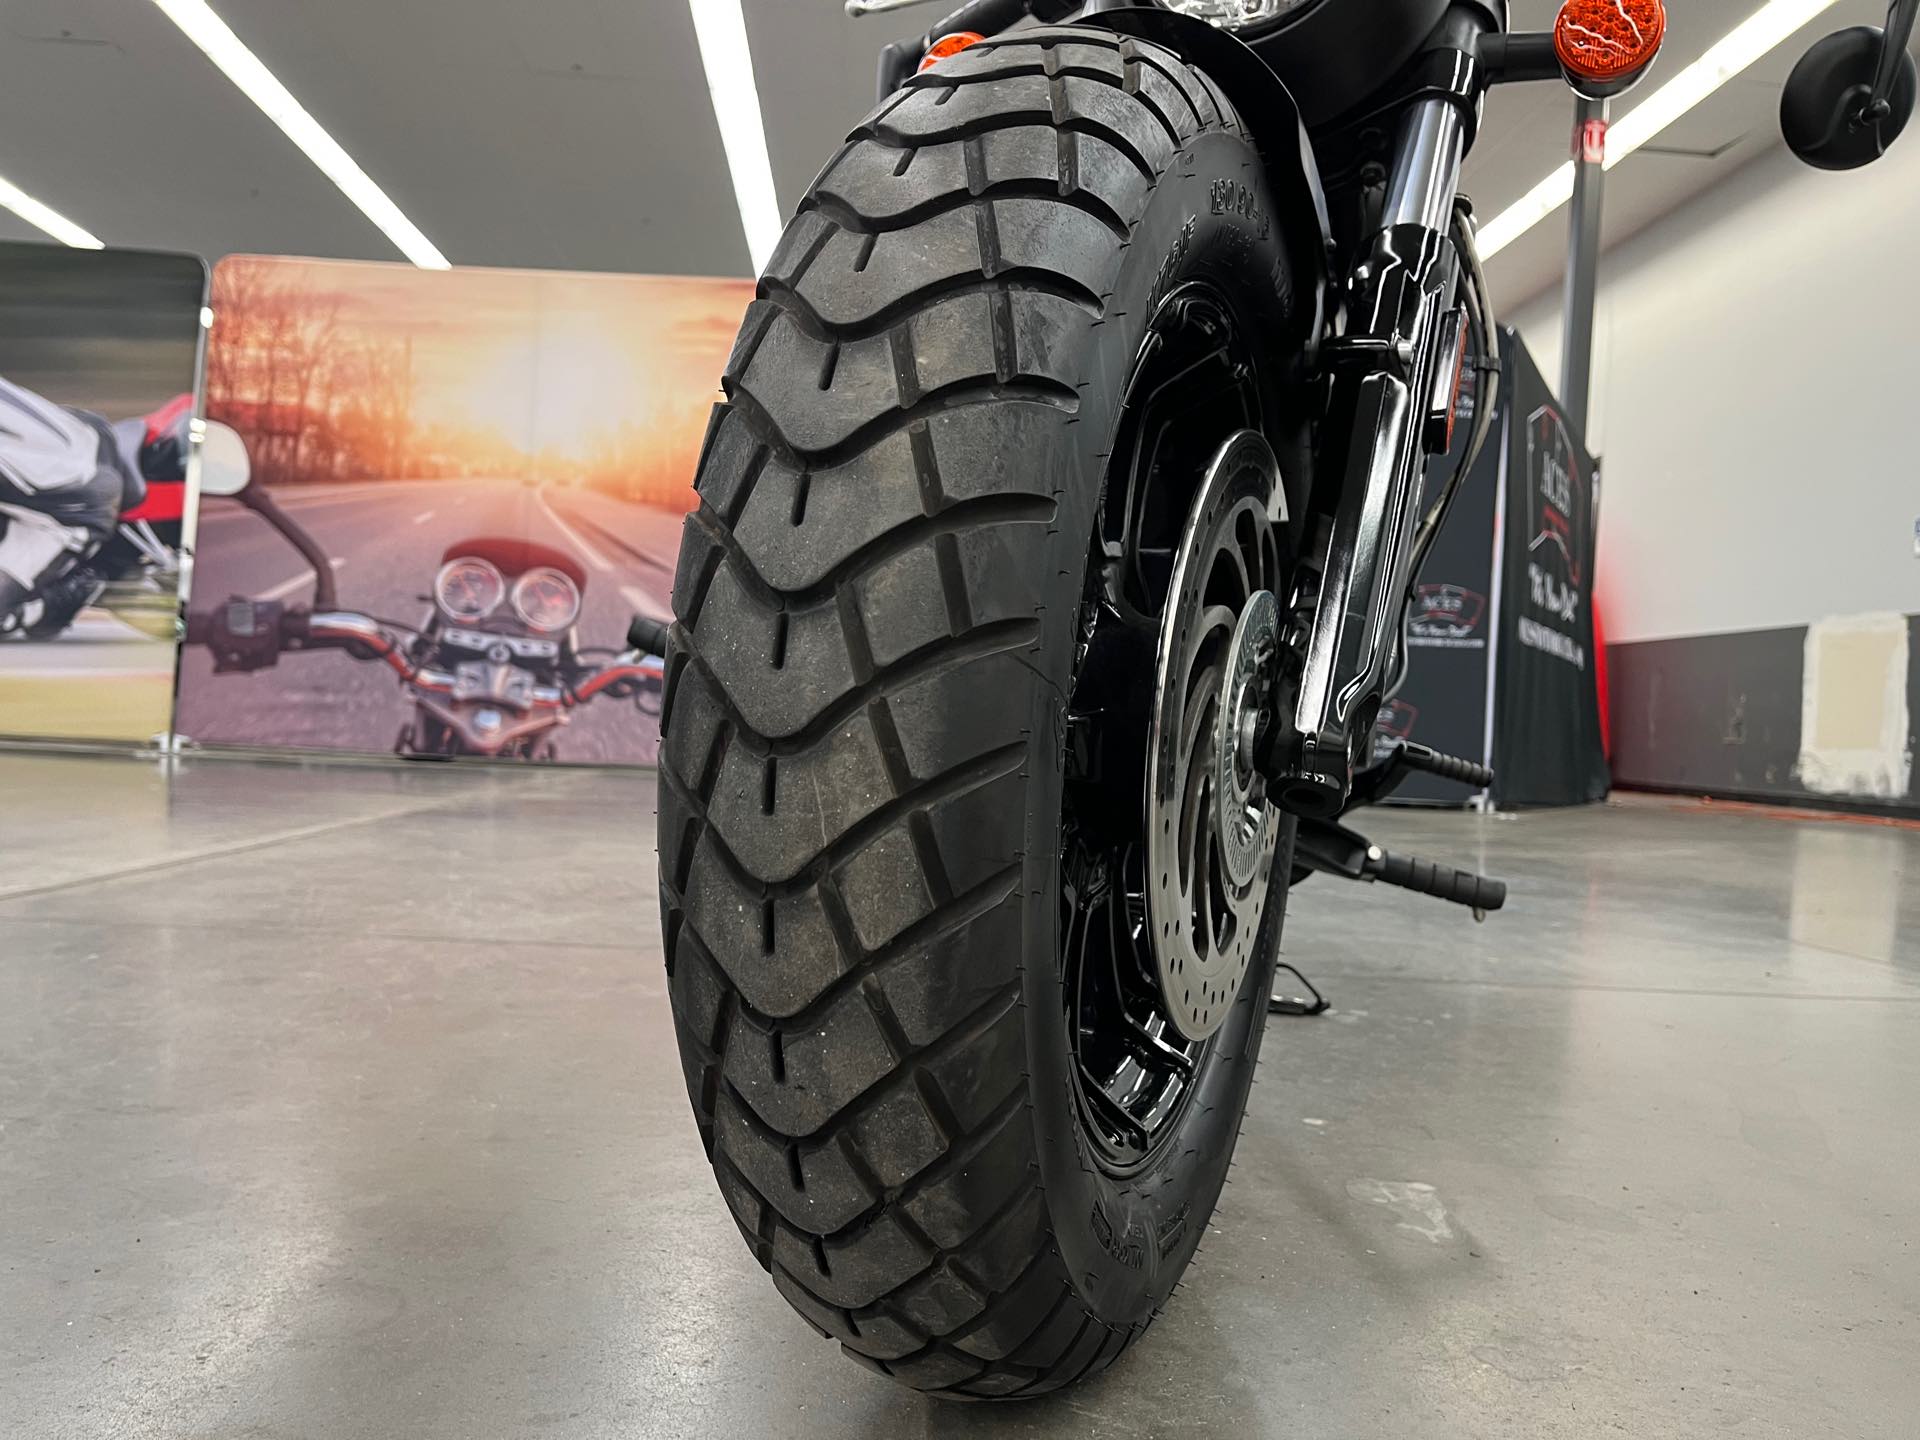 2019 Indian Motorcycle Scout Base at Aces Motorcycles - Denver